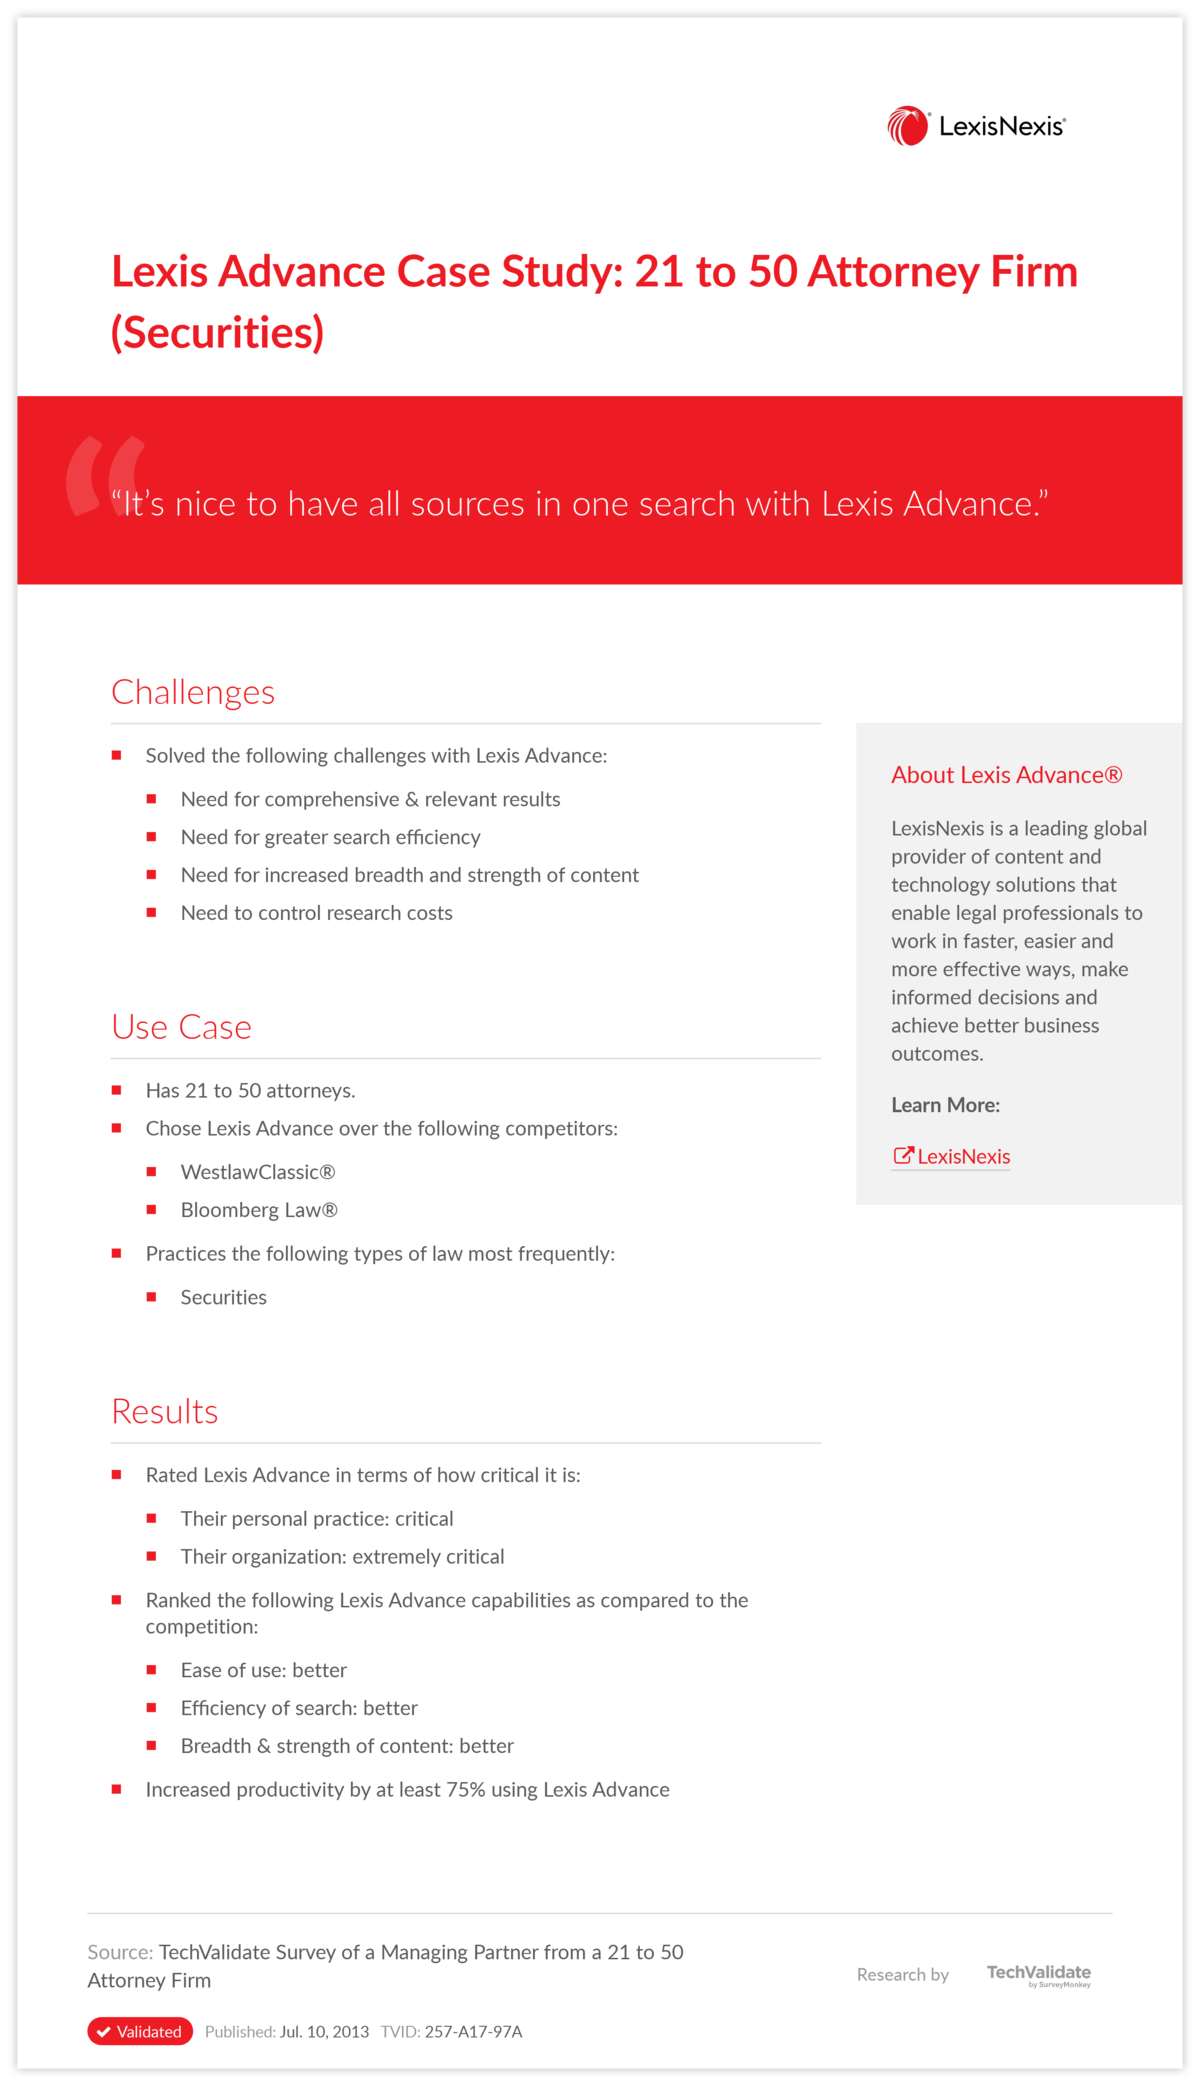 Lexis Advance Case Study: 21 to 50 Attorney Firm (Securities)